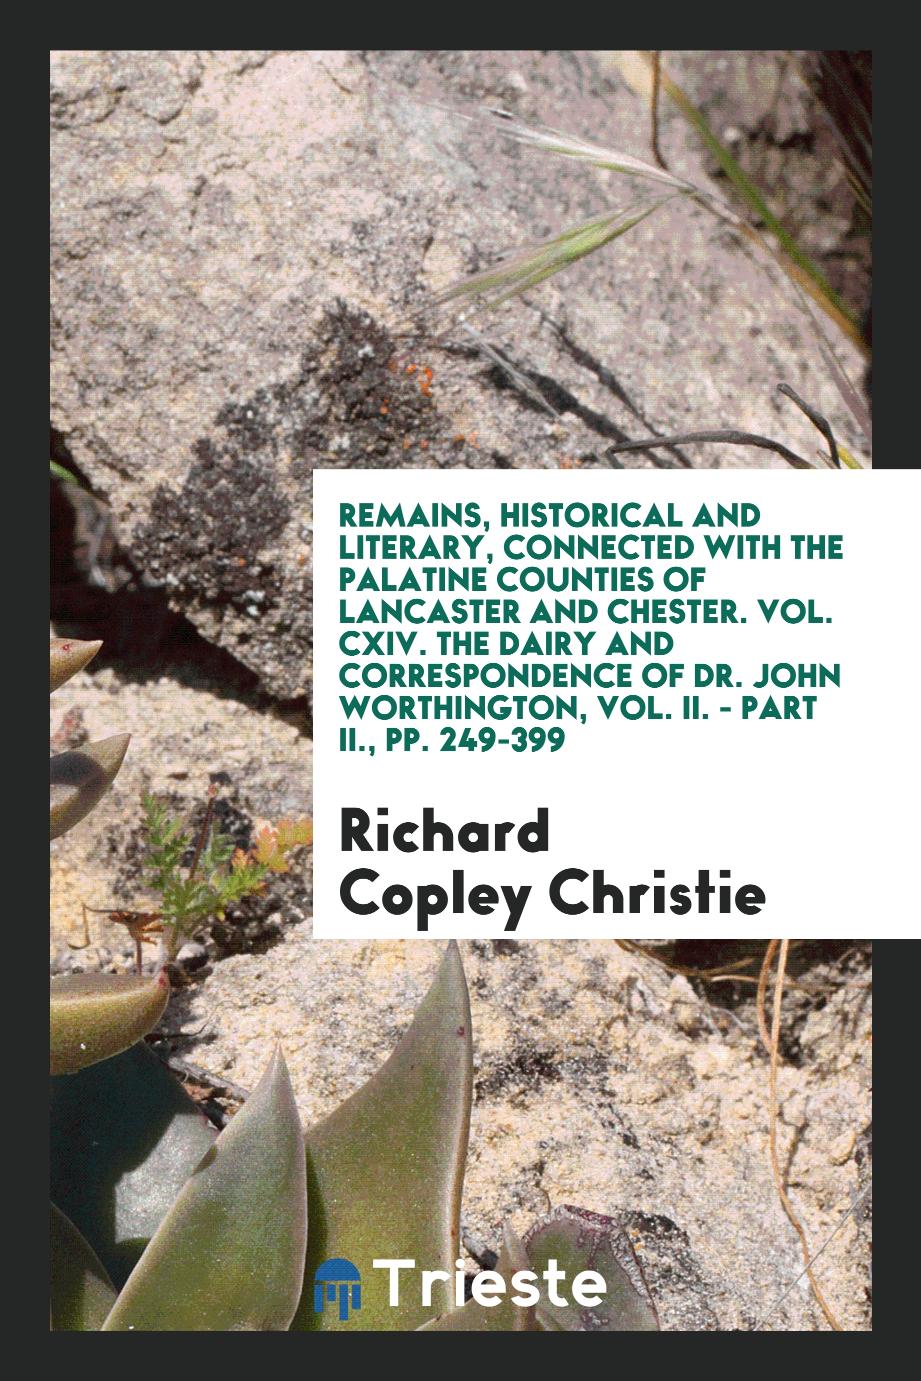 Remains, Historical and Literary, Connected with the Palatine Counties of Lancaster and Chester. Vol. CXIV. The Dairy and Correspondence of Dr. John Worthington, Vol. II. - Part II., pp. 249-399